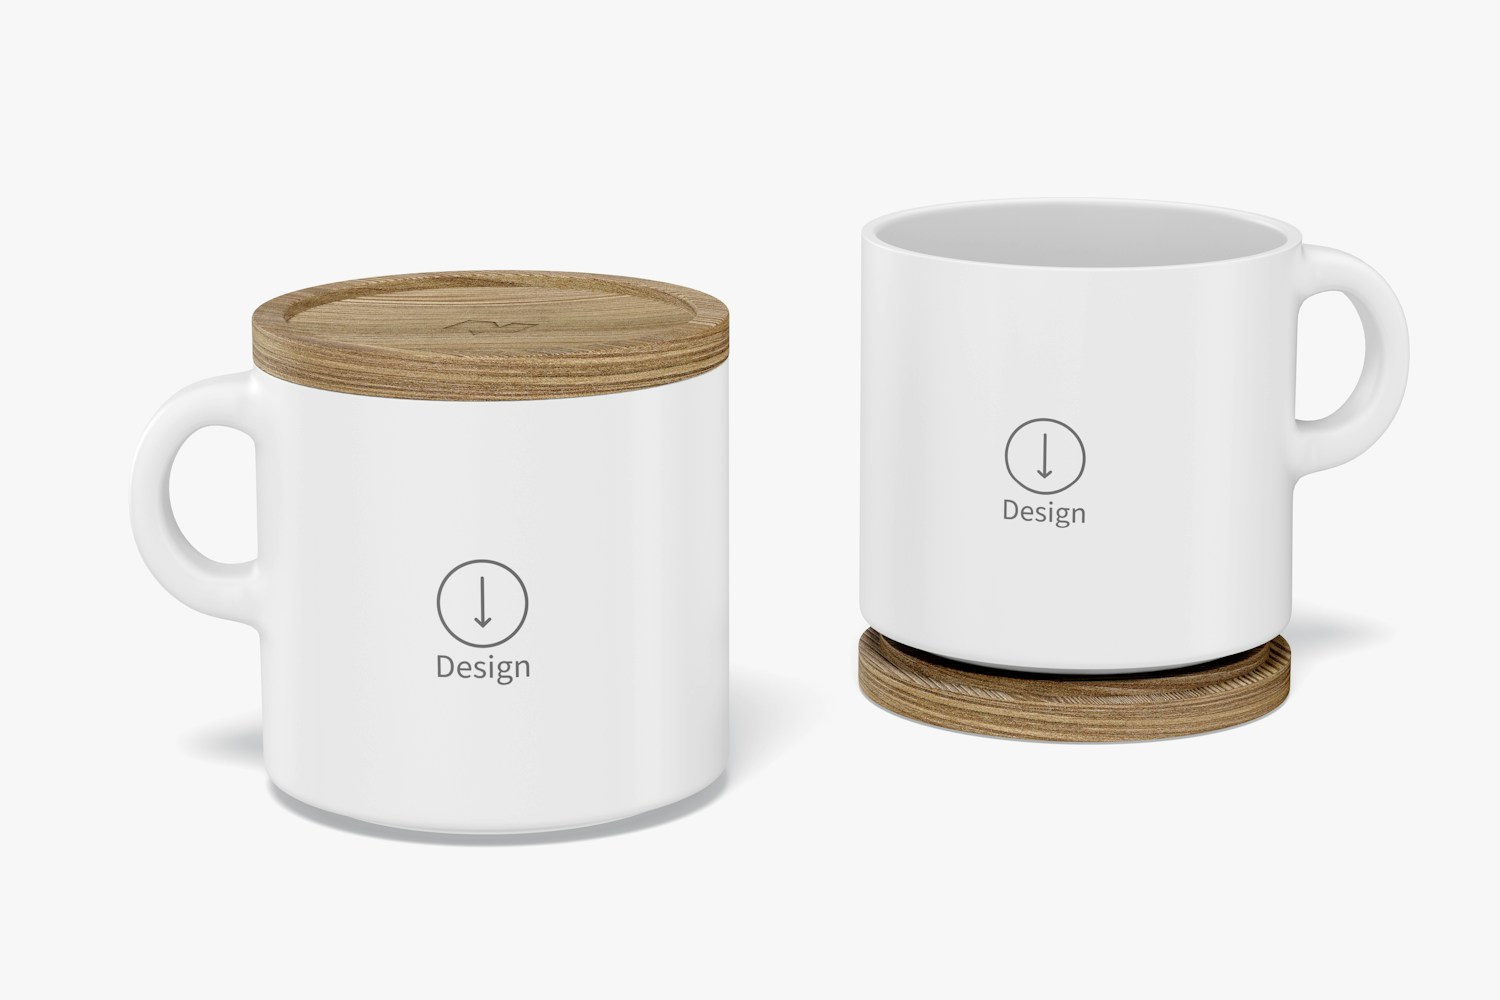 10 oz Ceramic Mugs with Bamboo Lid Mockup, Opened and Closed